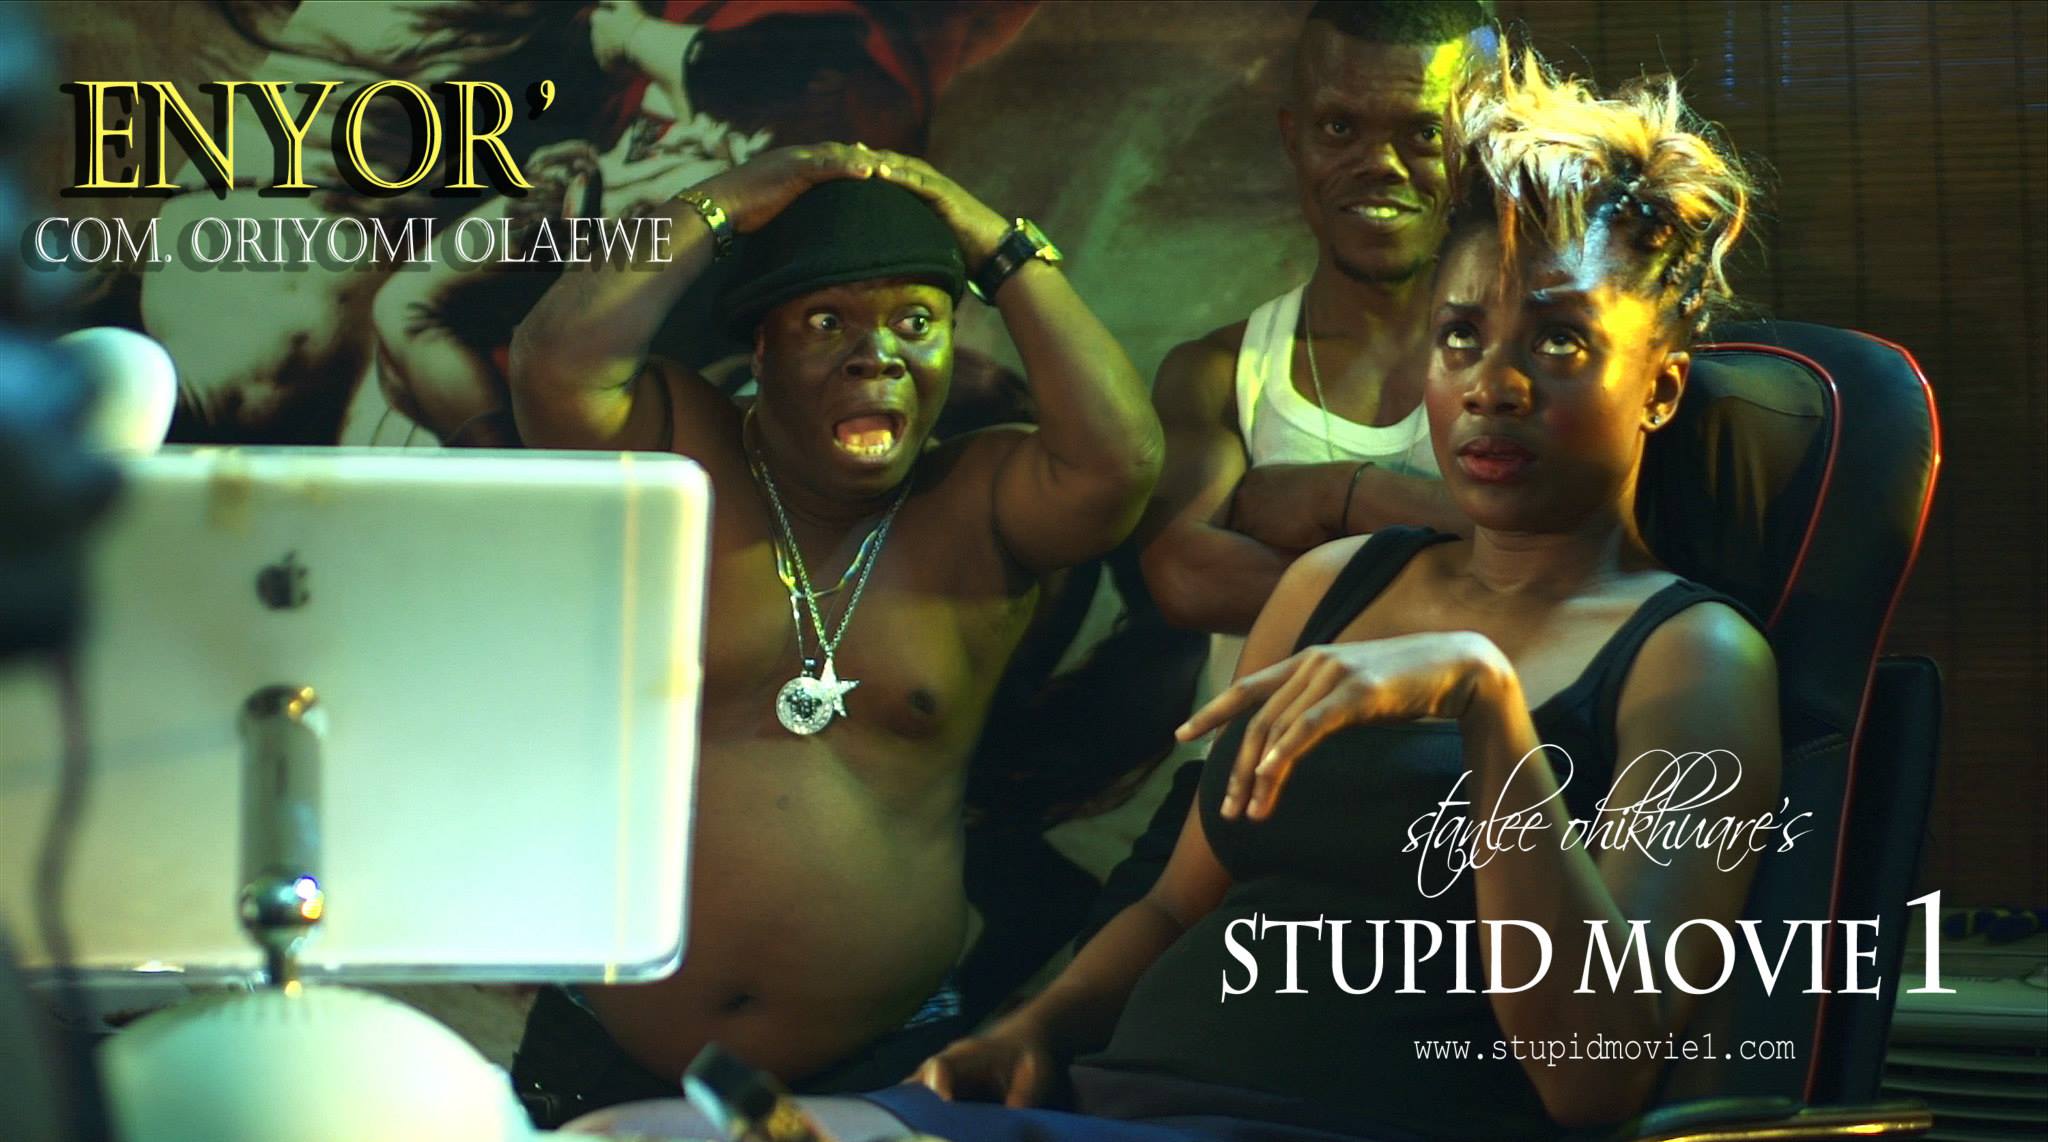 CHARACTER POSTER (ENYOR) for Stanlee Ohikhuare's STUPID MOVIE 1